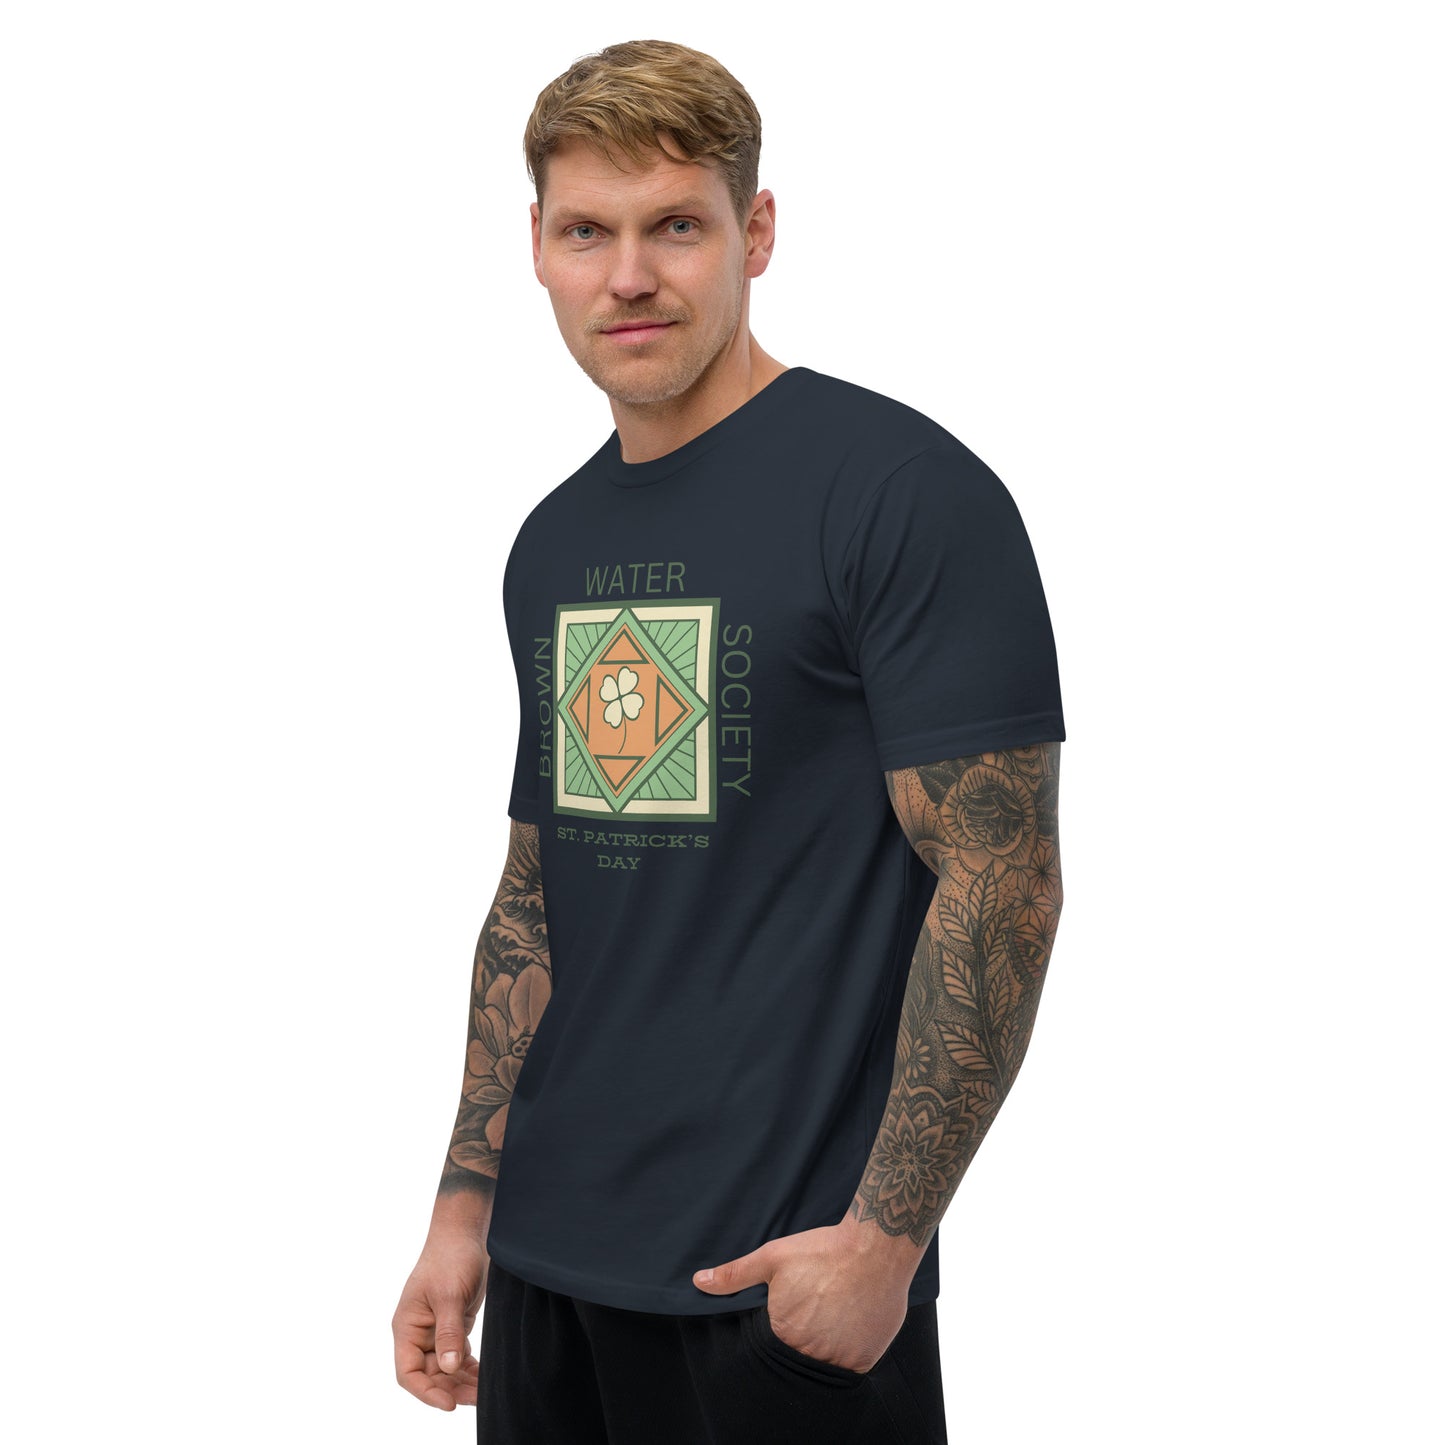 St. Paddy's Day T-shirt